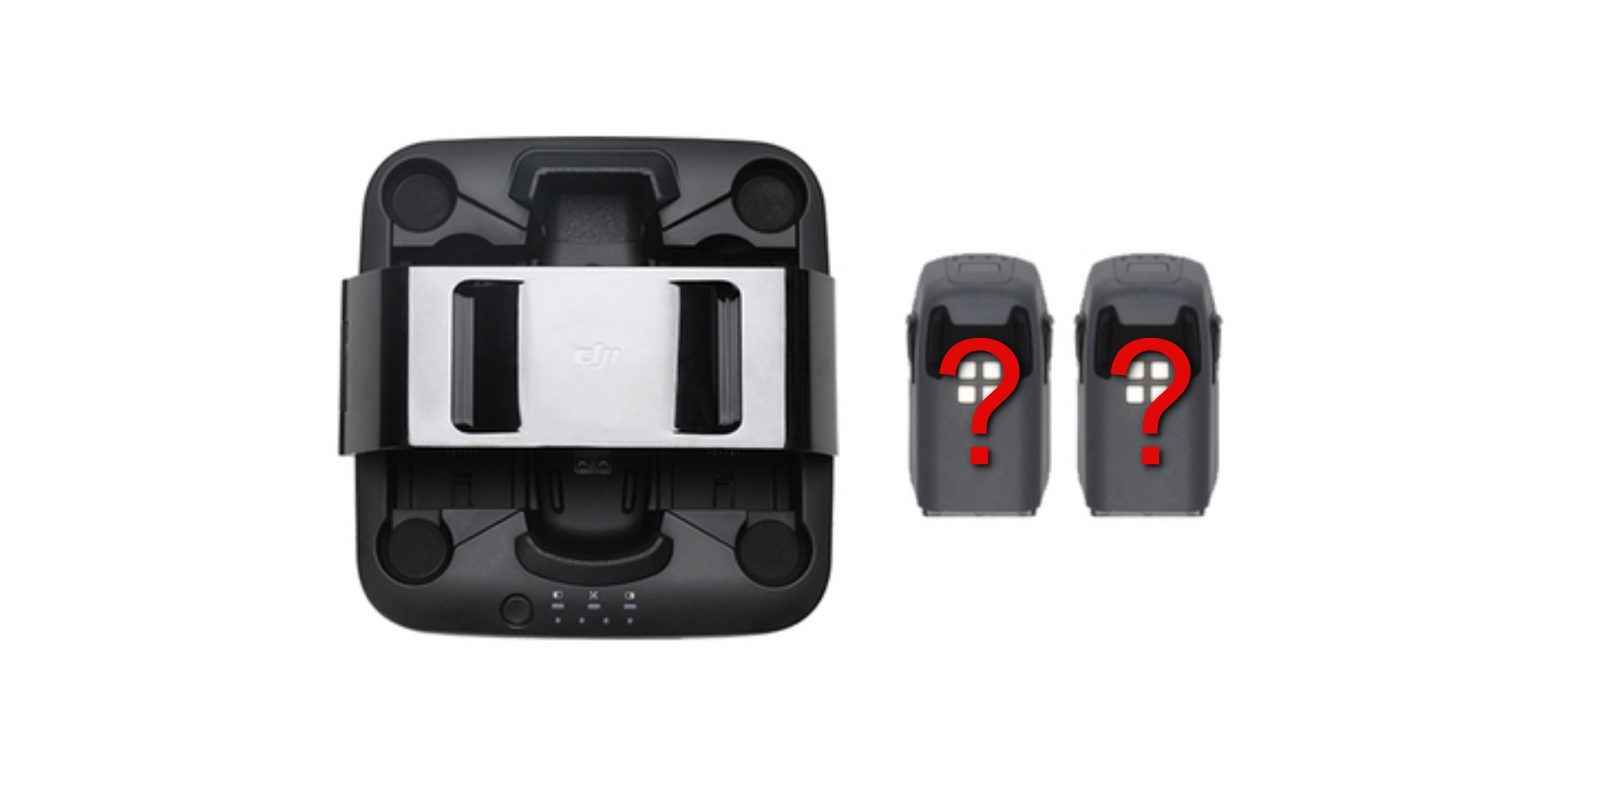 New Spark Portable Power Pack - DJI website is unclear about what is in the box